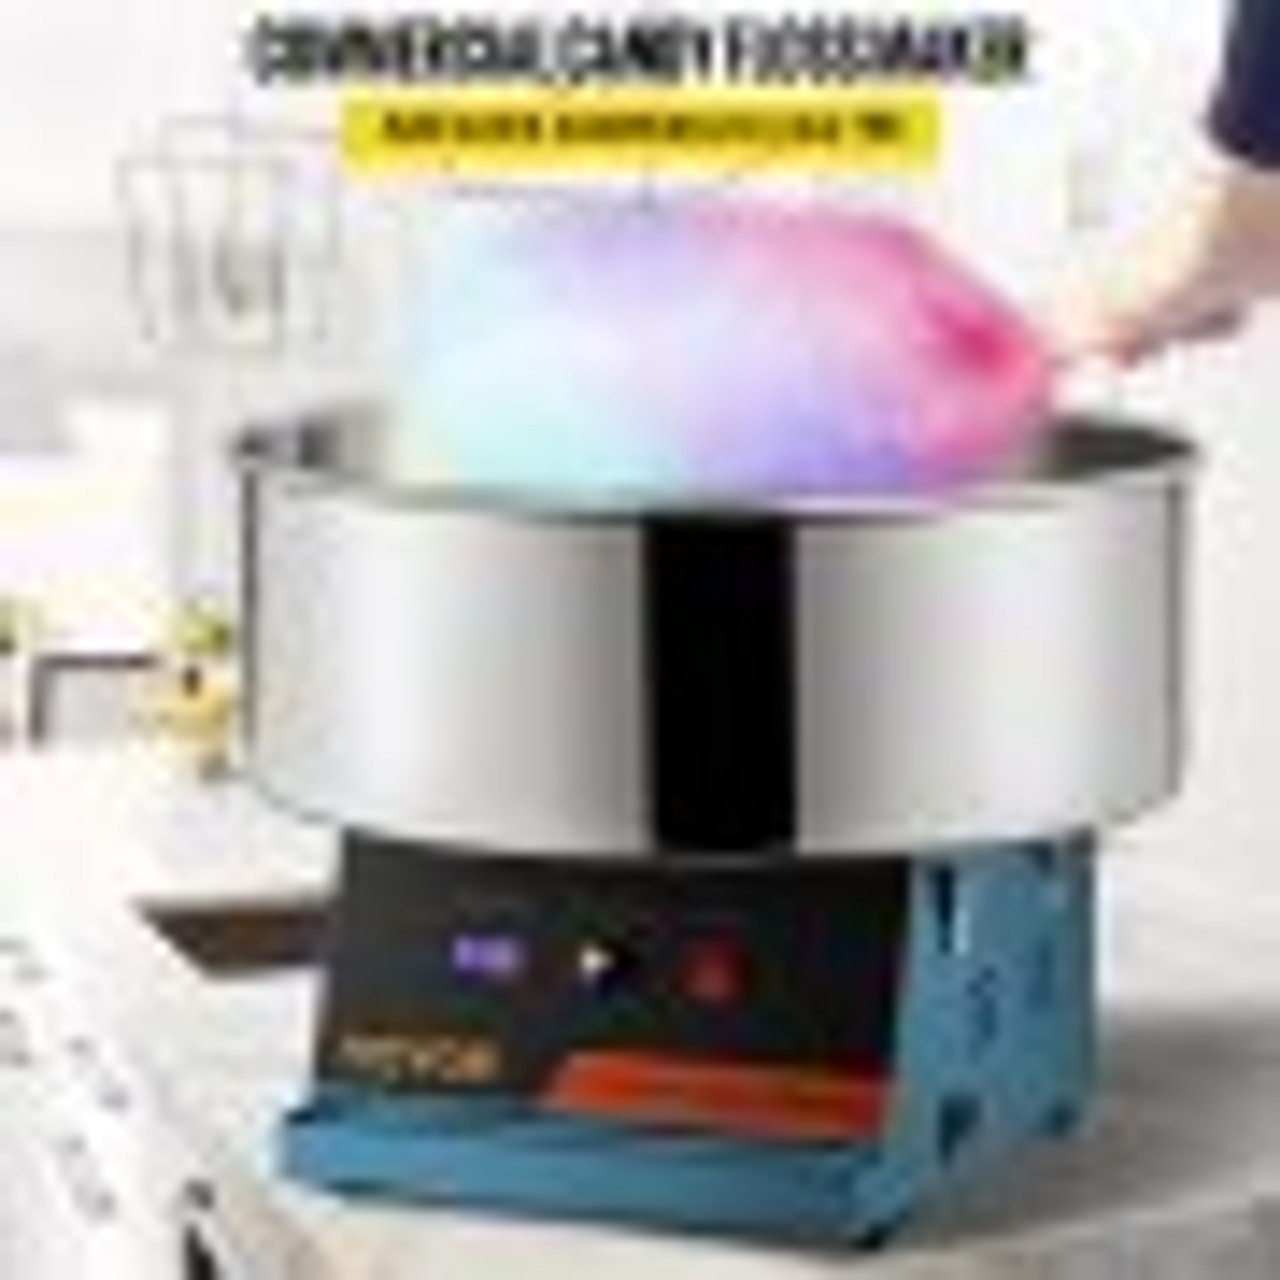 Electric Cotton Candy Machine, 19.7-inch Cotton Candy Maker, 1050W Candy Floss Maker, Blue Commercial Cotton Candy Machine with Stainless Steel Bowl and Sugar Scoop, Perfect for Family Party